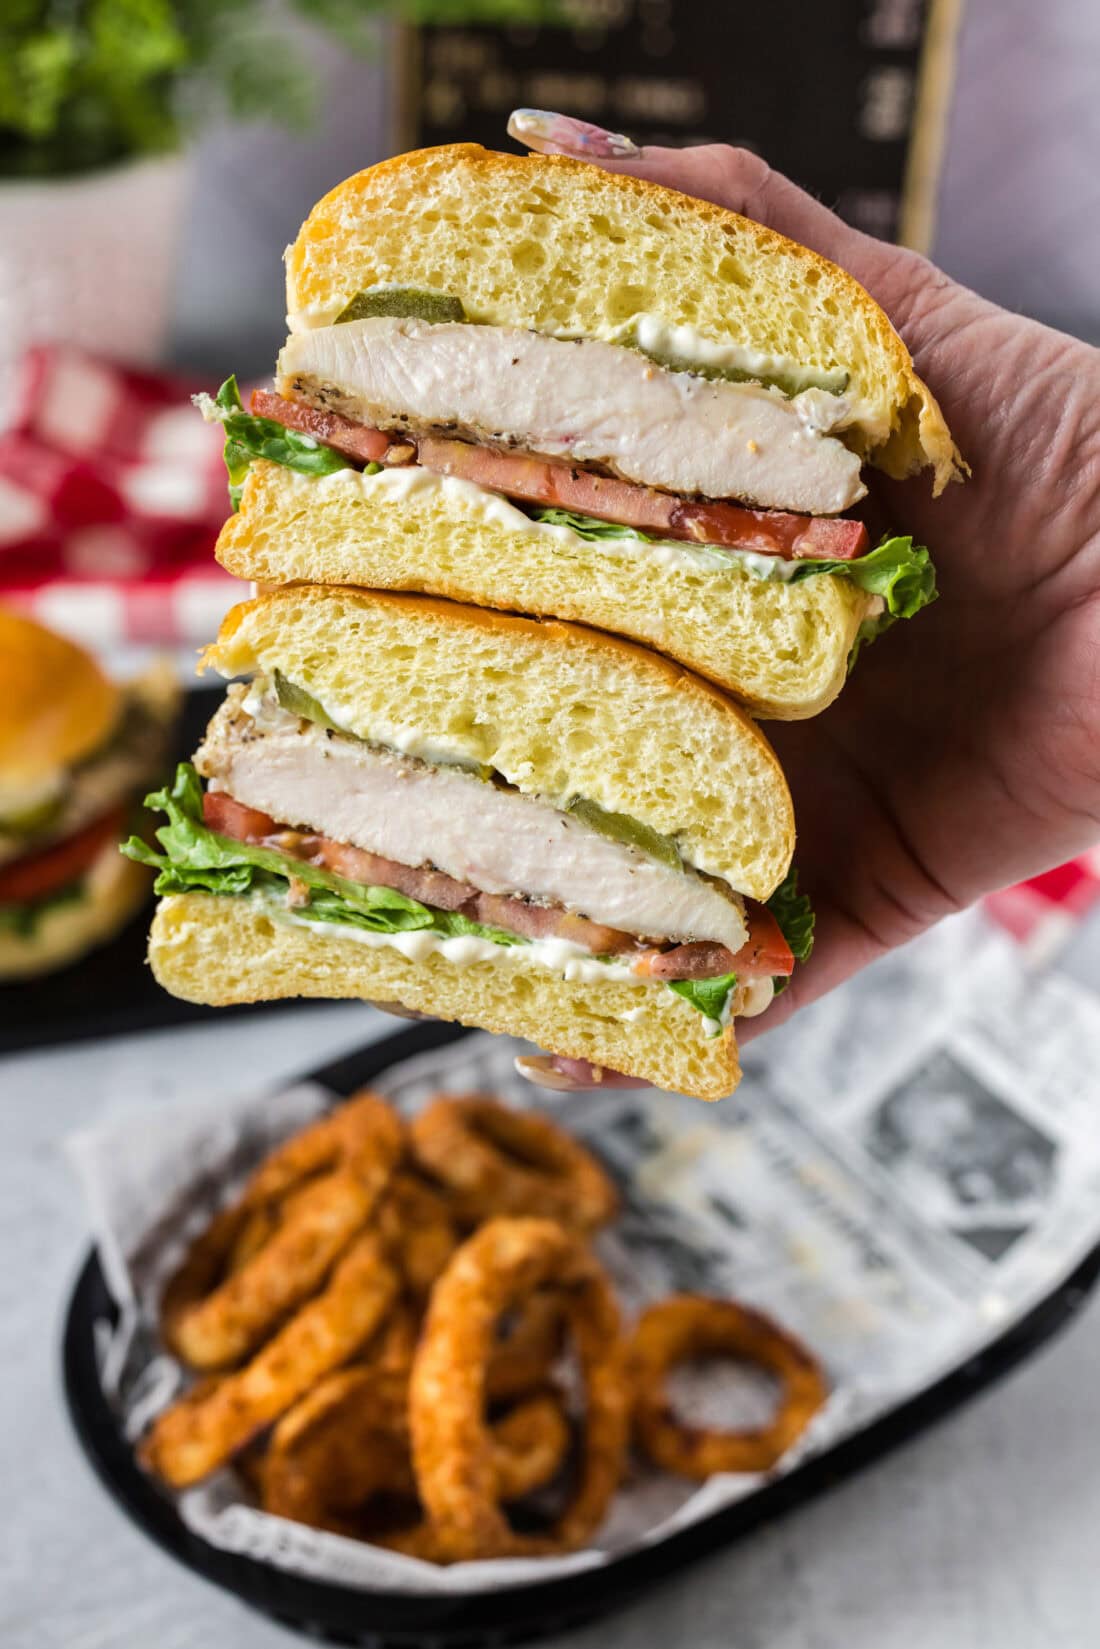 Hand holding a Chicken Sandwich that has been cut in half